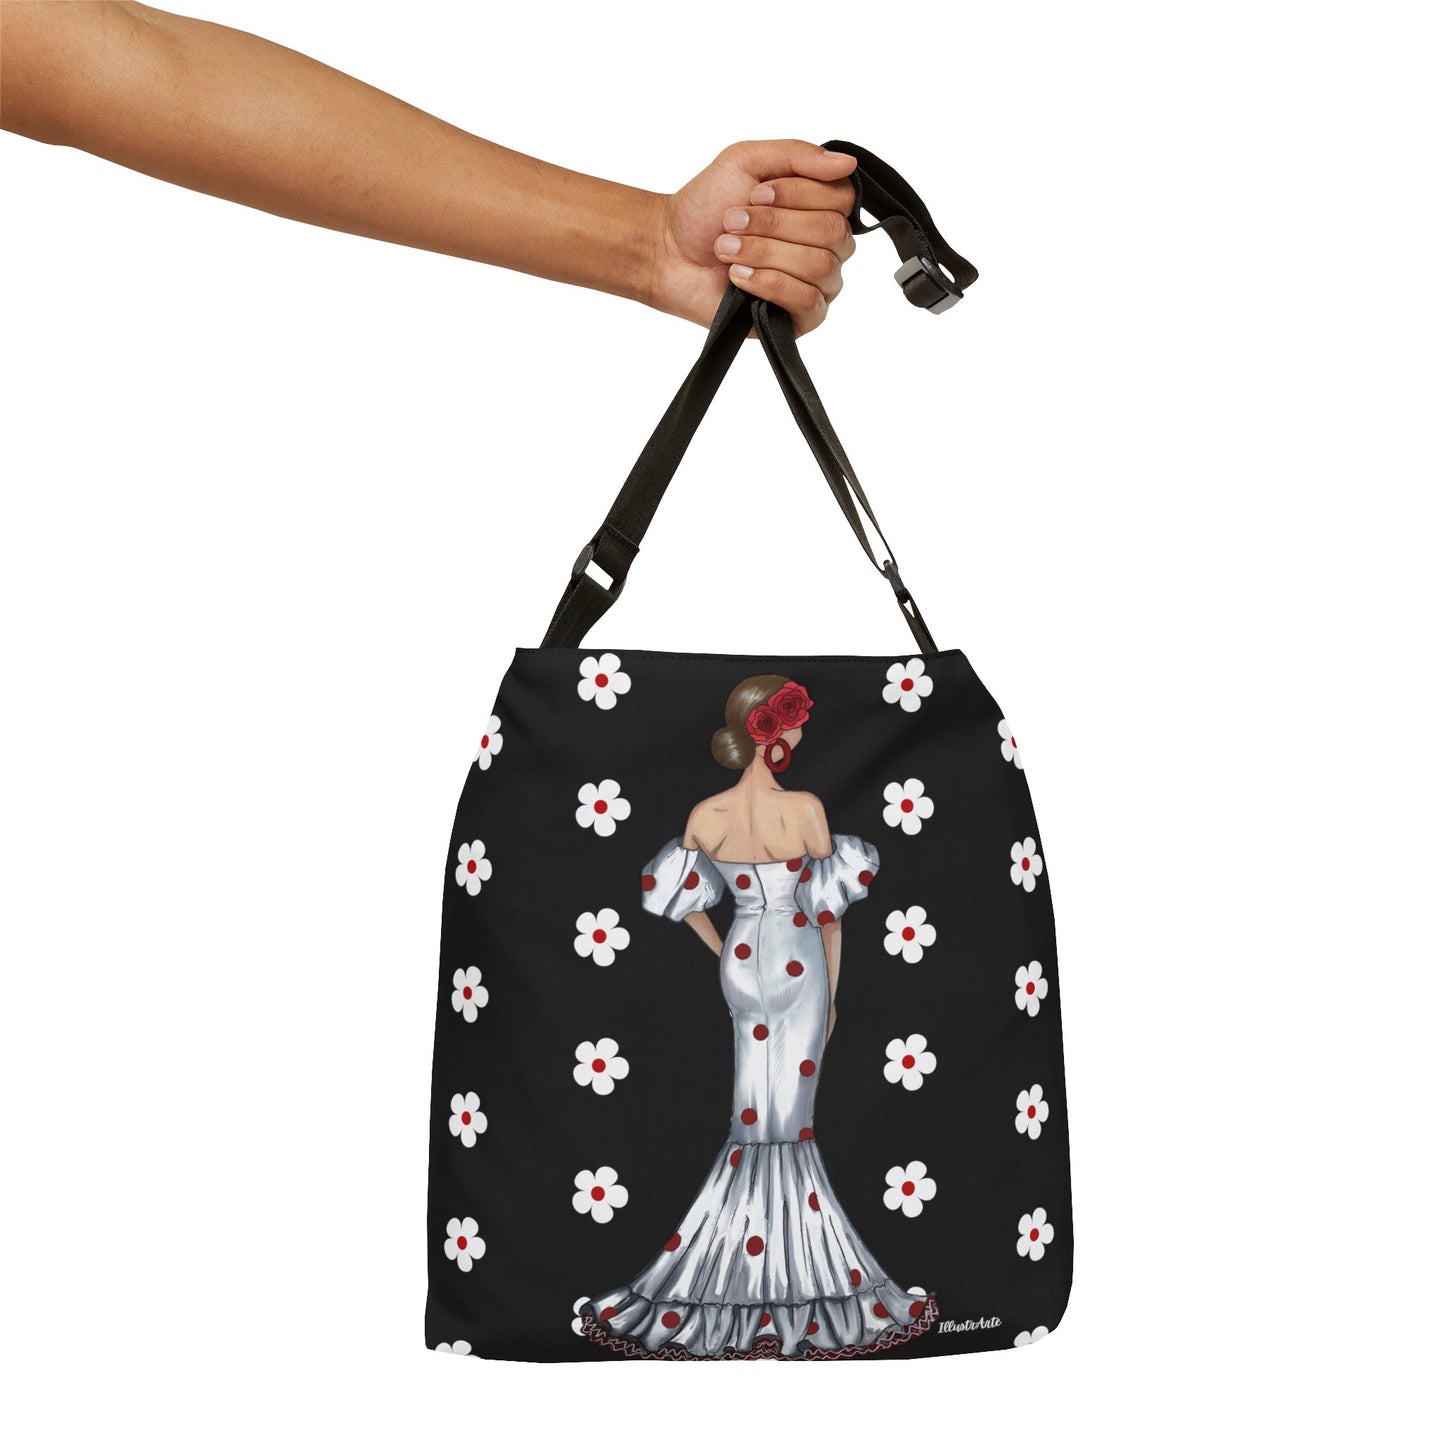 Flamenco Dancer Tote Bag with adjustable straps, flamenco dancer Maite with red/orange background and flowers